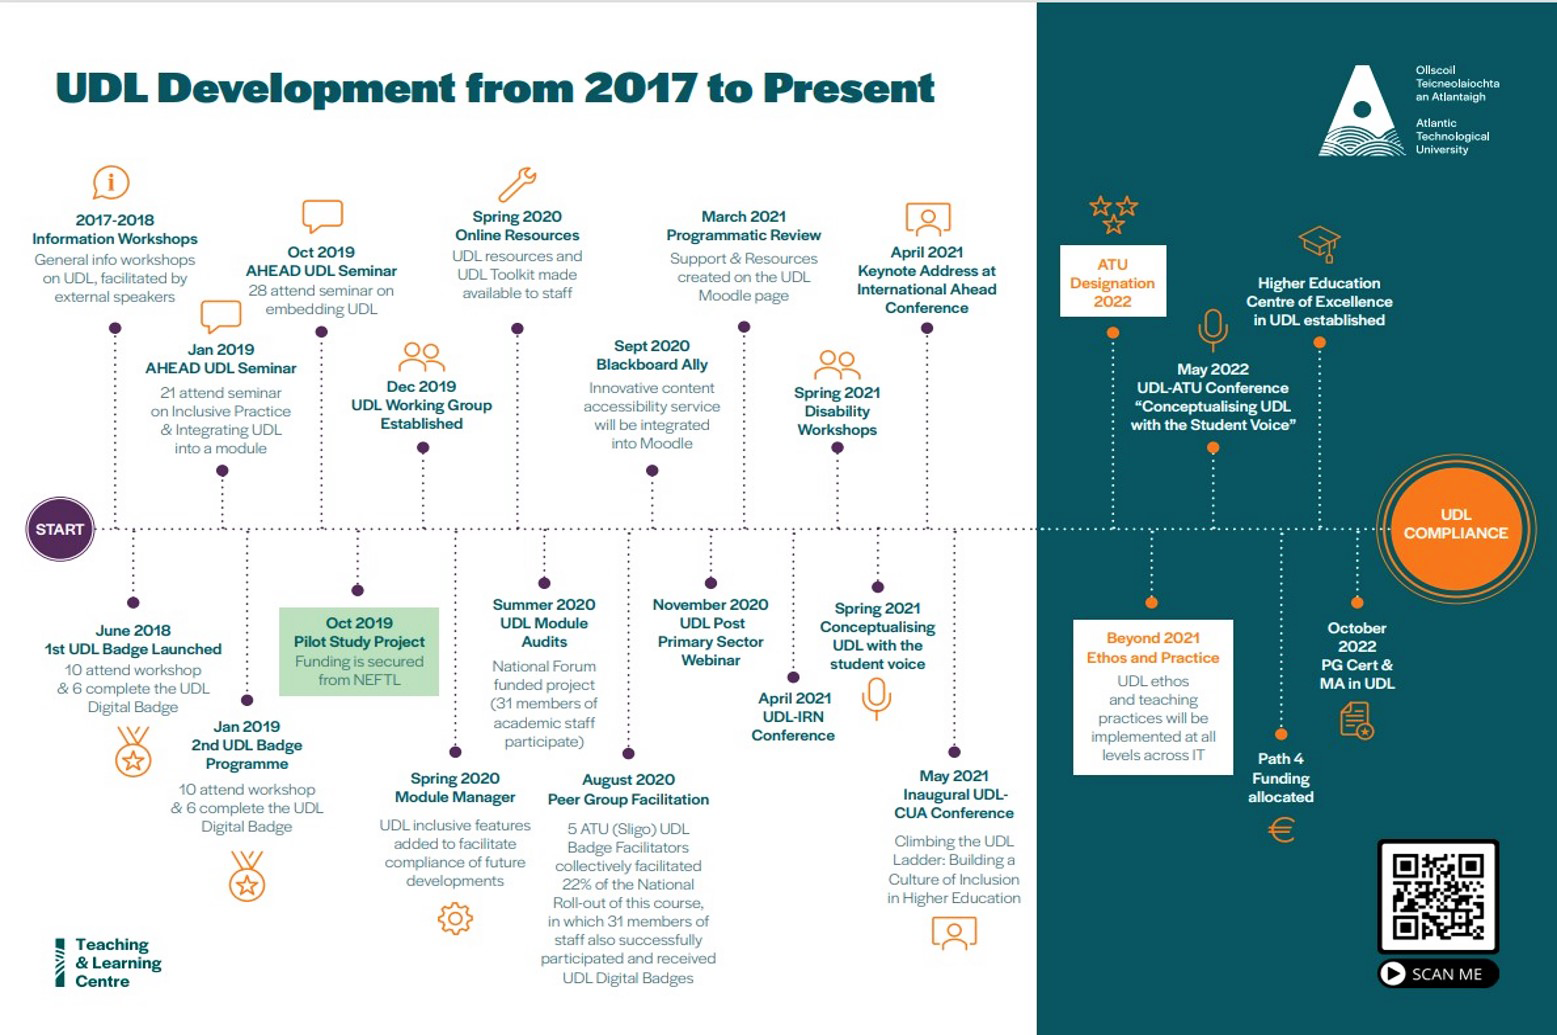 An infographic showing the UDL development from 2017 to present at ATU. Starting with information workshops for staff in 2017 and 2018. In 2018 the first udl badge was launched. In 2019 a UDL working group was established. In 2022 a higher education centre of excellence in UDL was established and the PG cert and MA in UDL were launched.